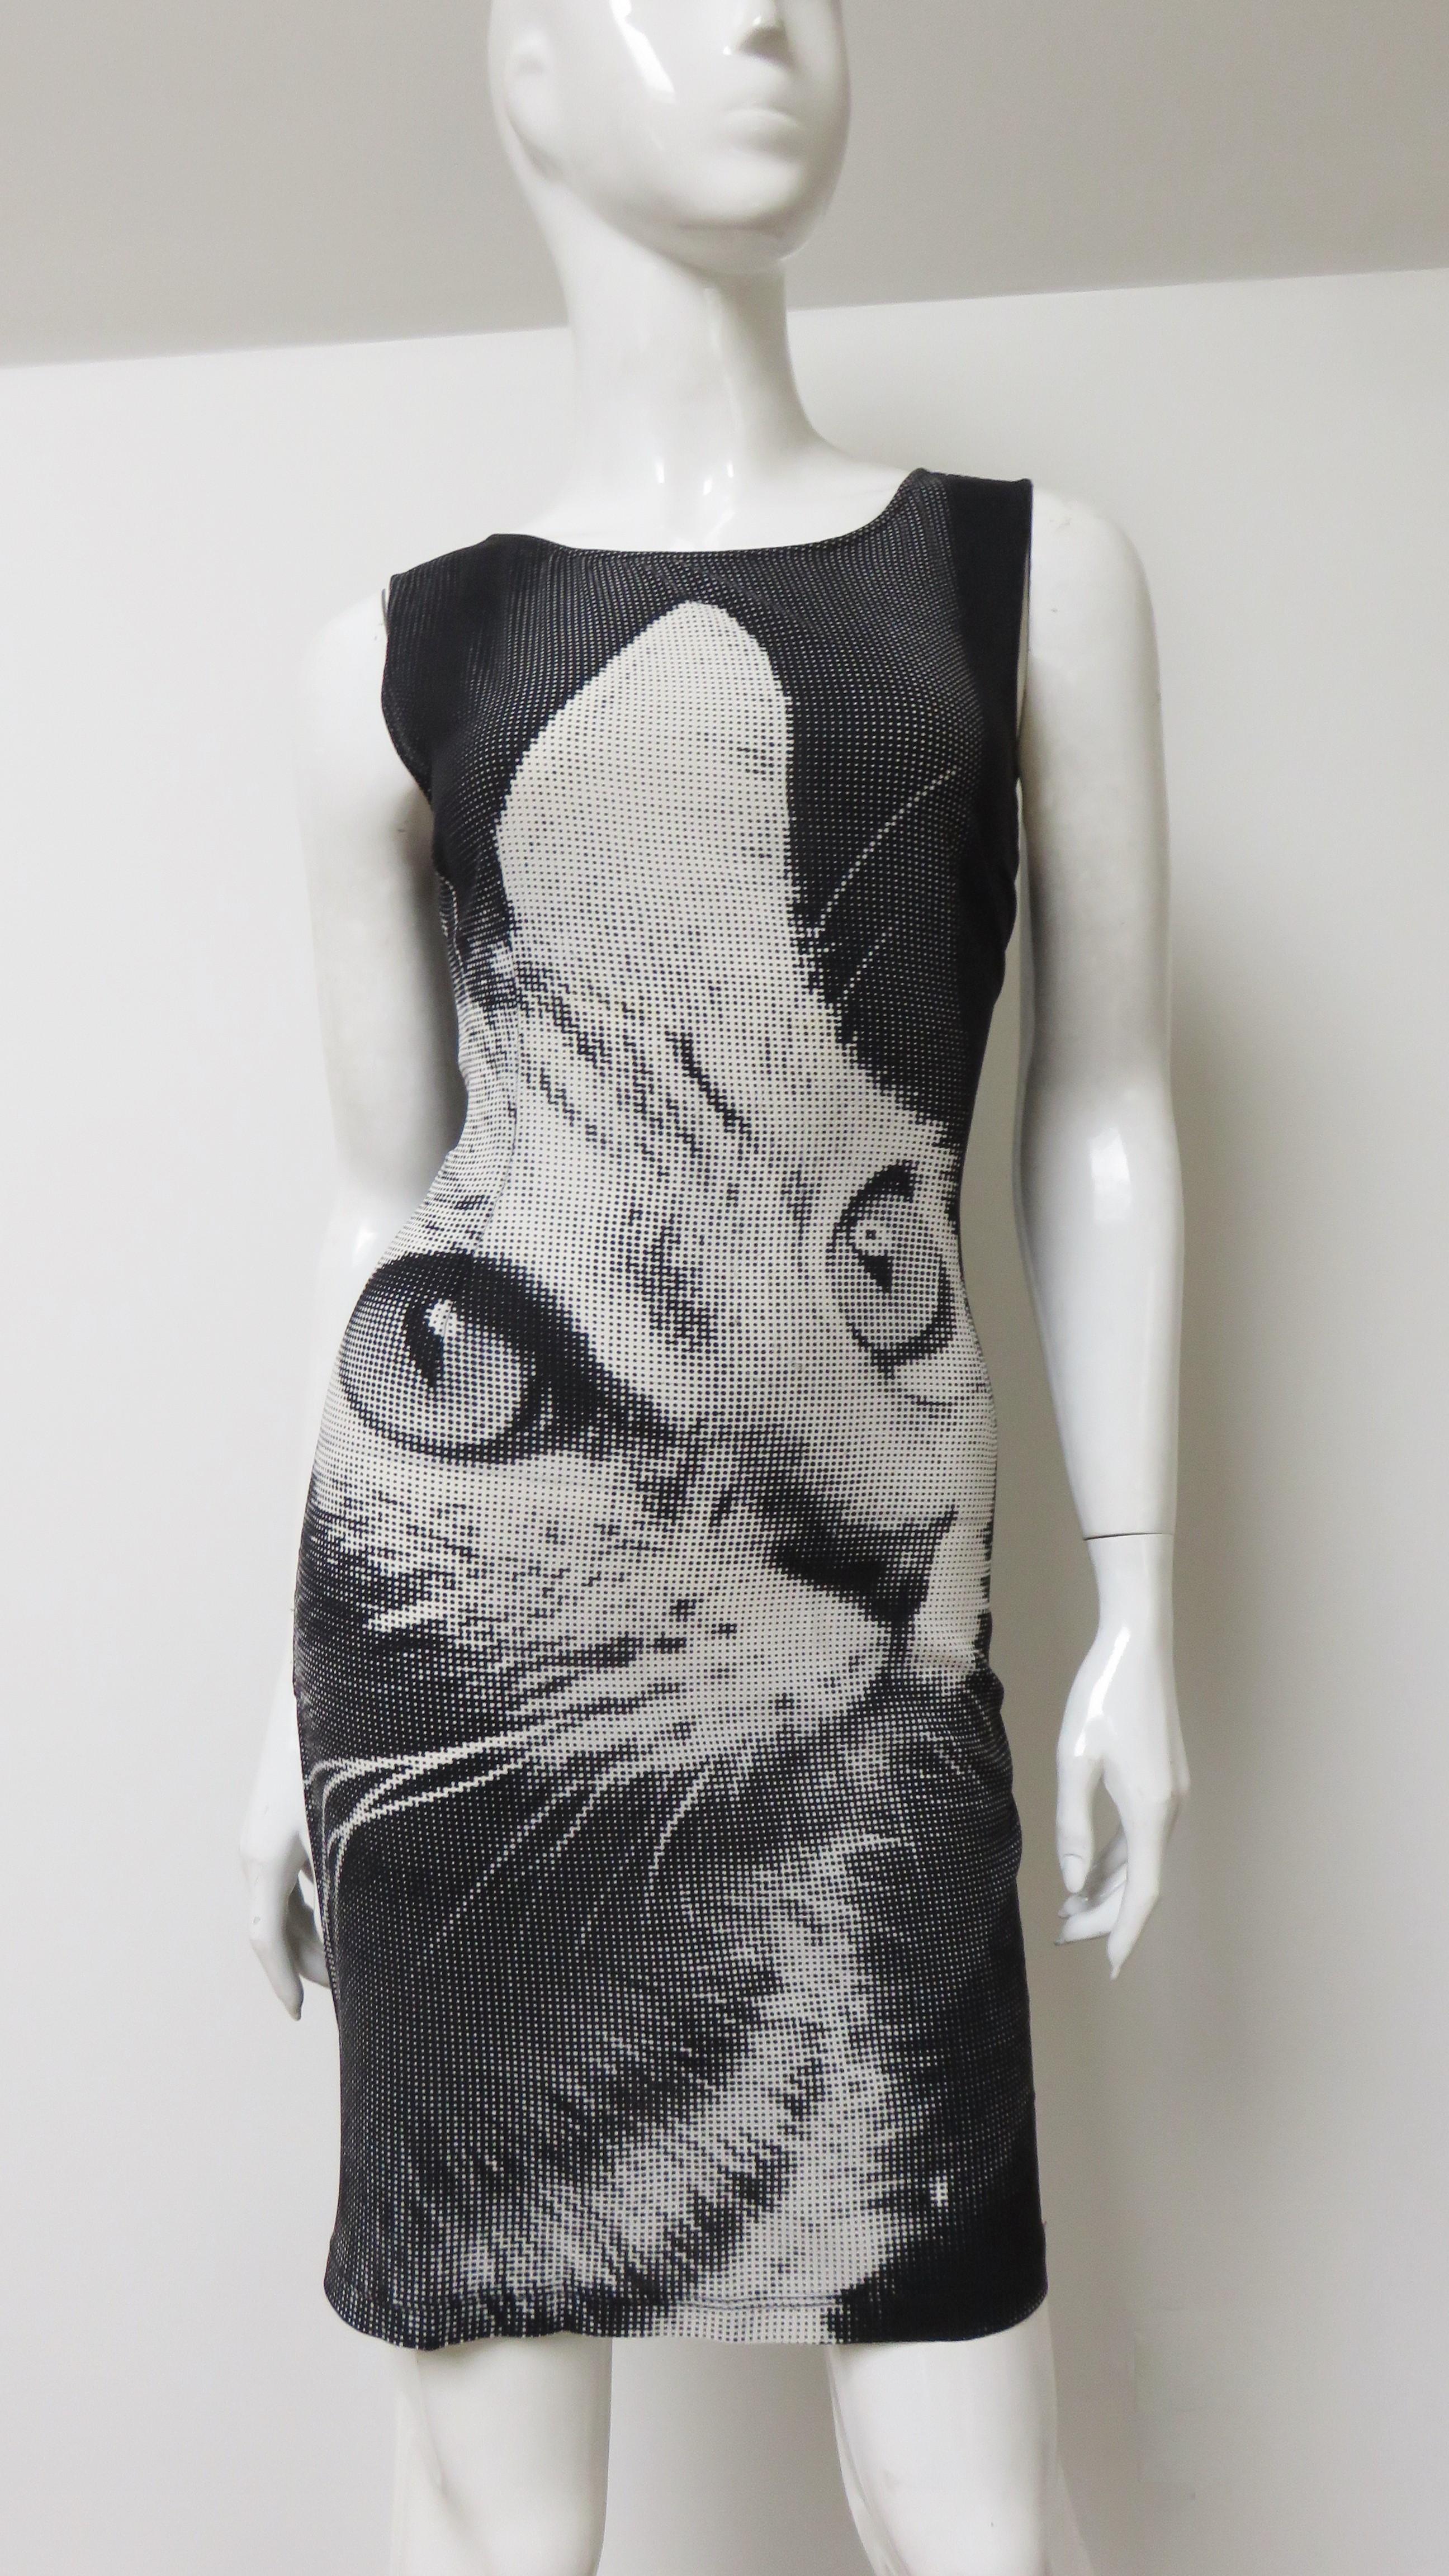 A fabulous silk dress with some stretch from Dolce & Gabbana with a grey, black and white pixelated cat image on the front. it is a sleeveless, fitted dress with a crew neckline and V in the back. It has a center back zipper and is unlined.
Fits